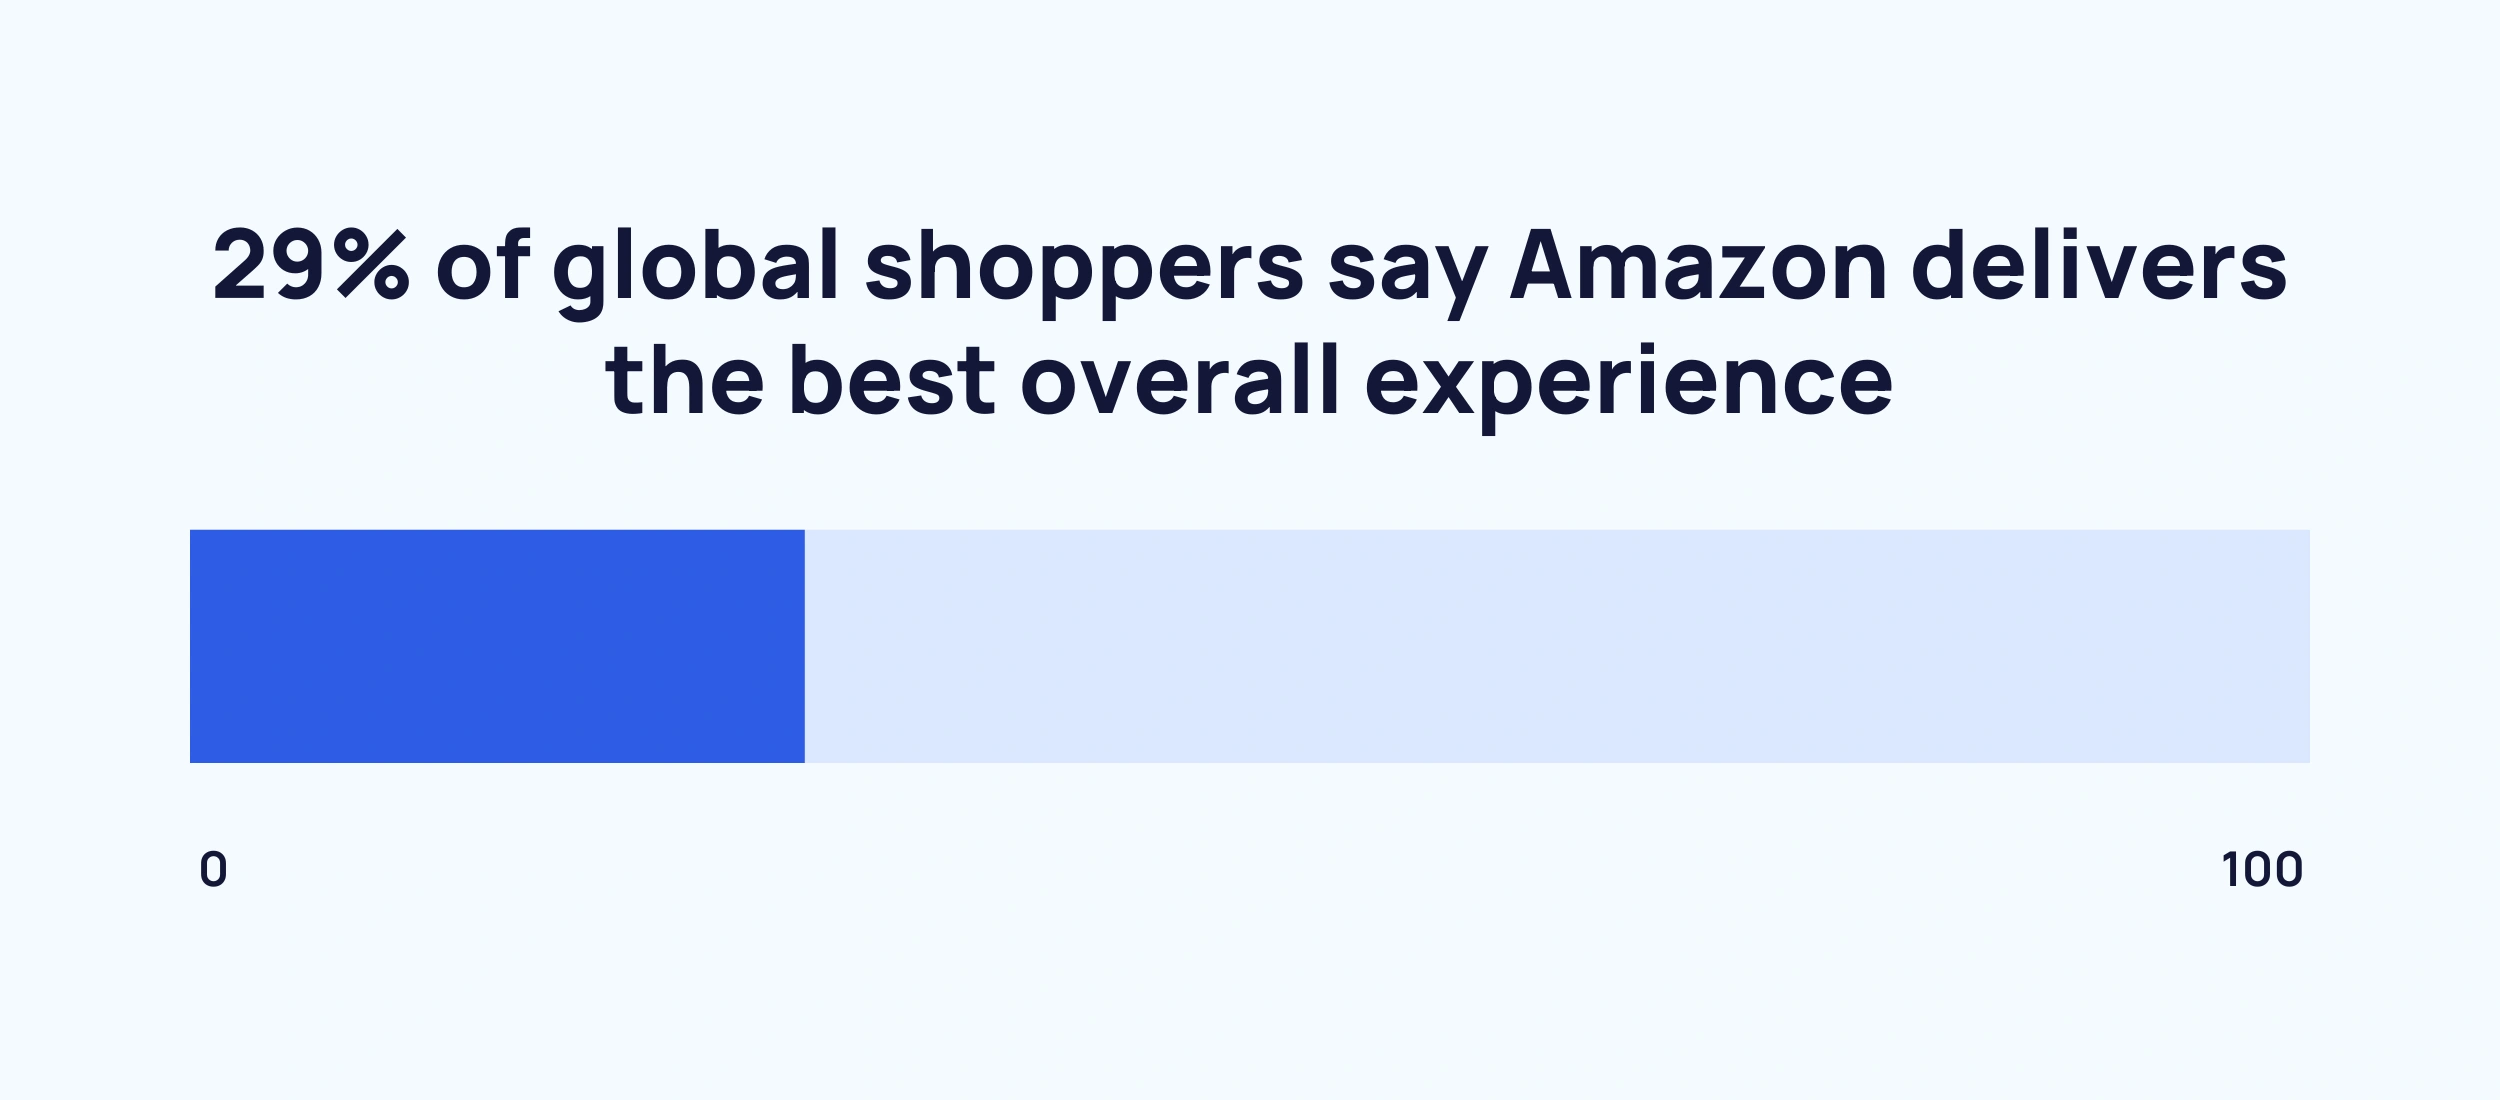 amazon-best-overall-experience-min.png